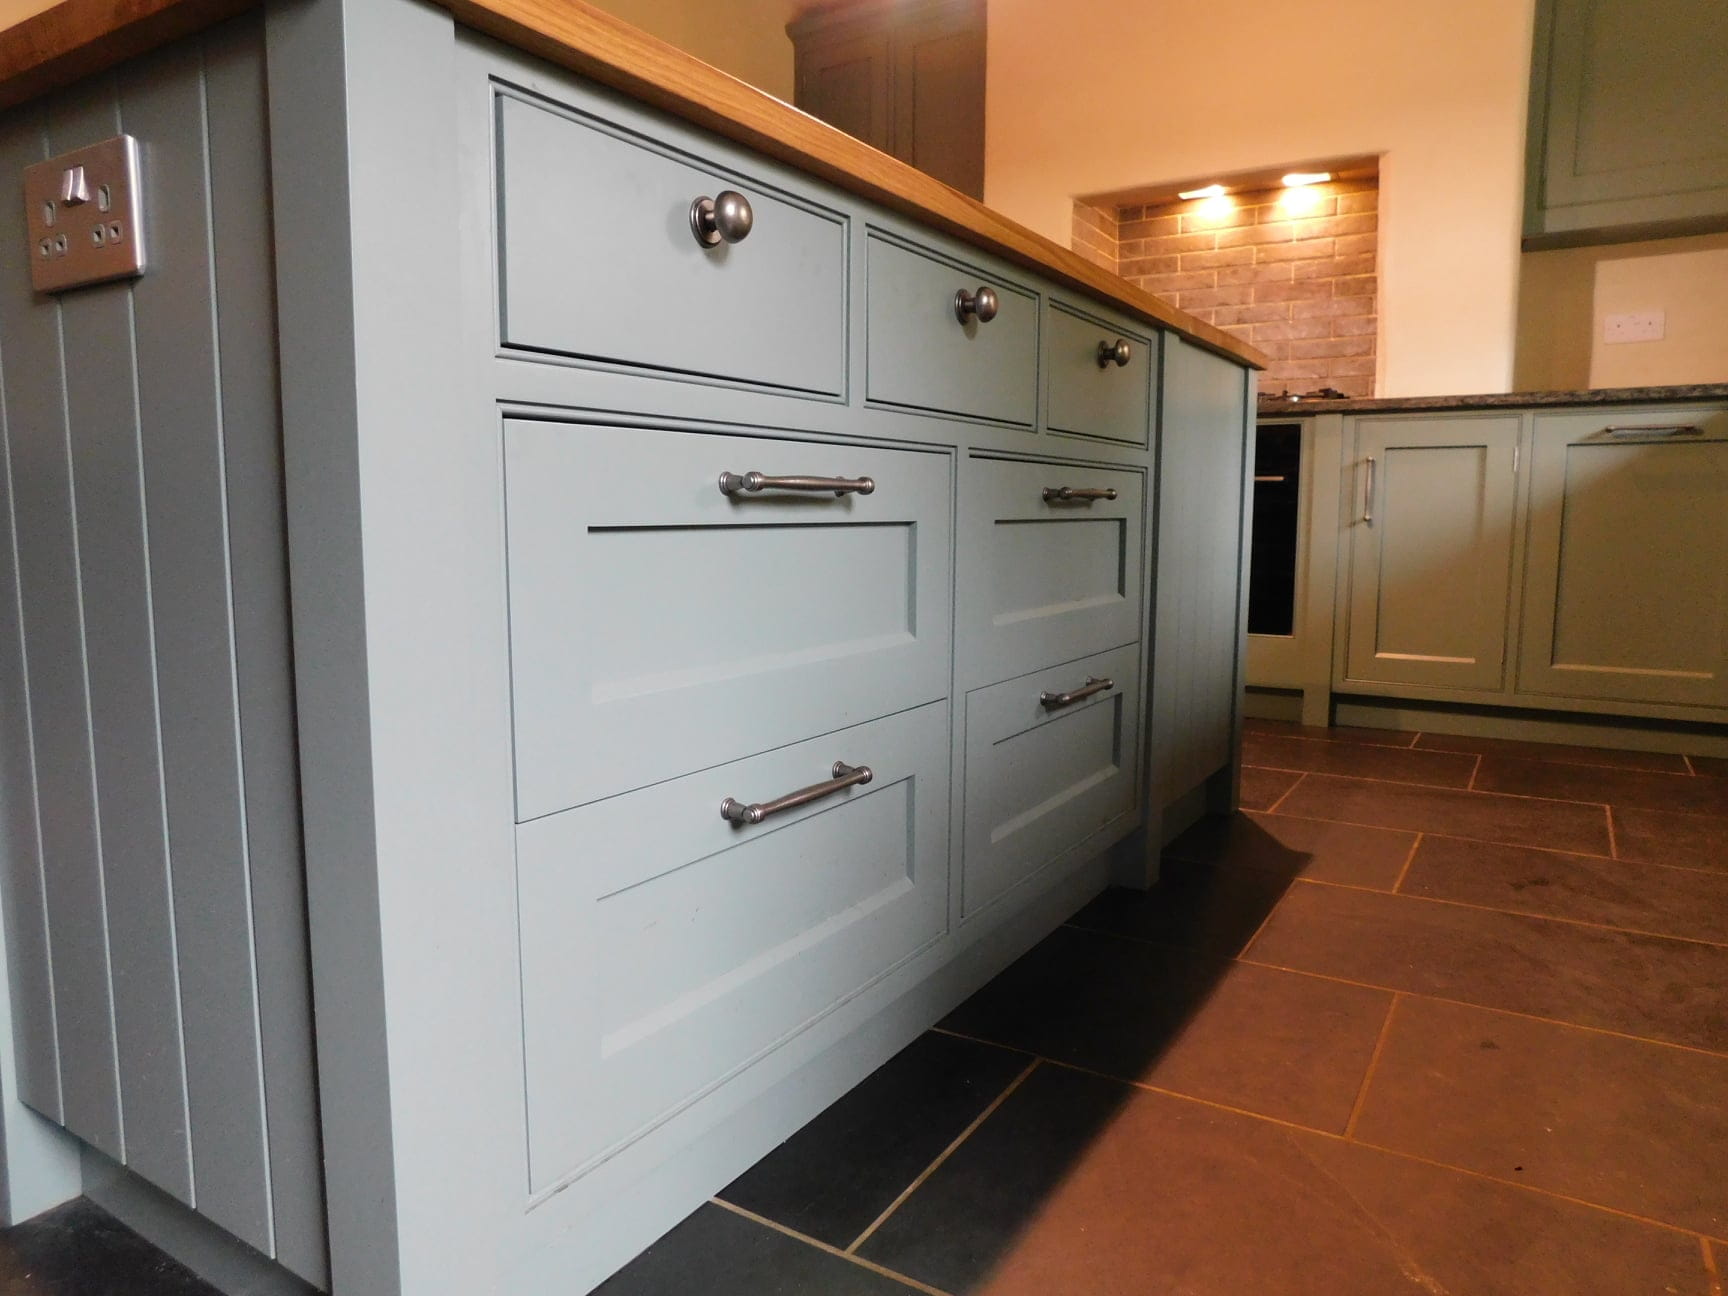 An island counter with cupboards and drawers.